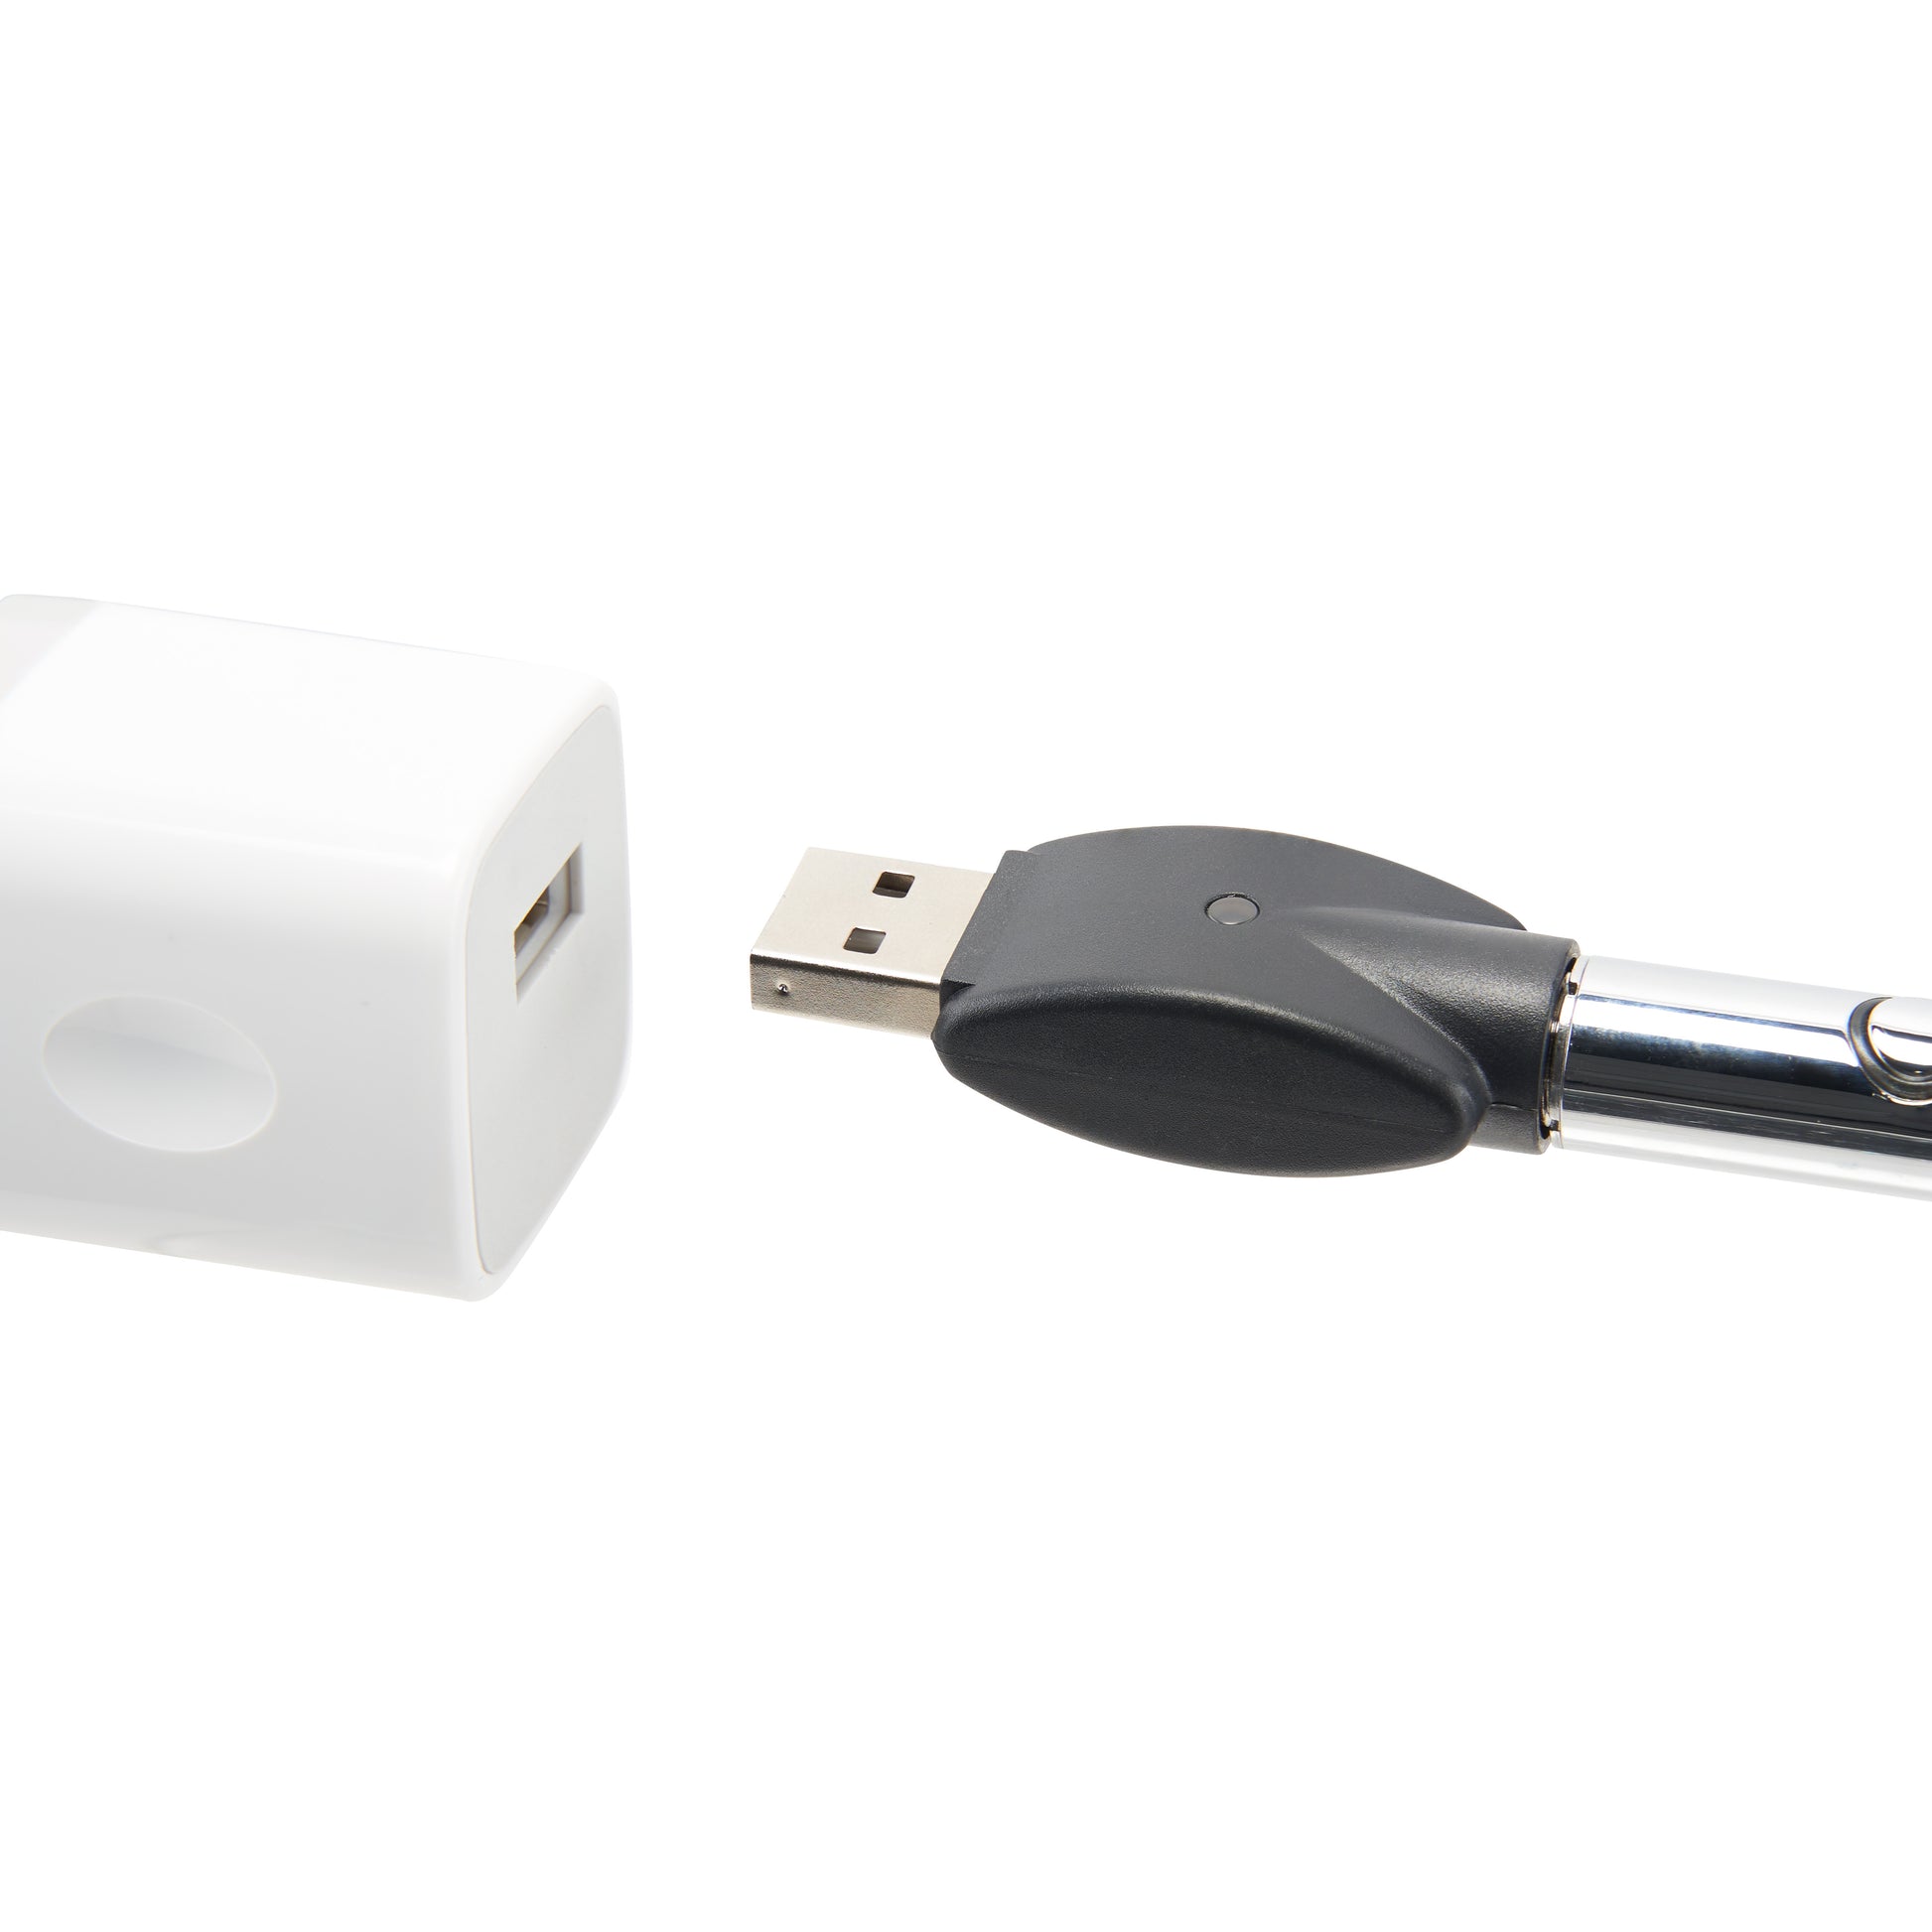 The chrome Ooze Wink is plugged into its 510 charger, being plugged into a white square USB wall adapter